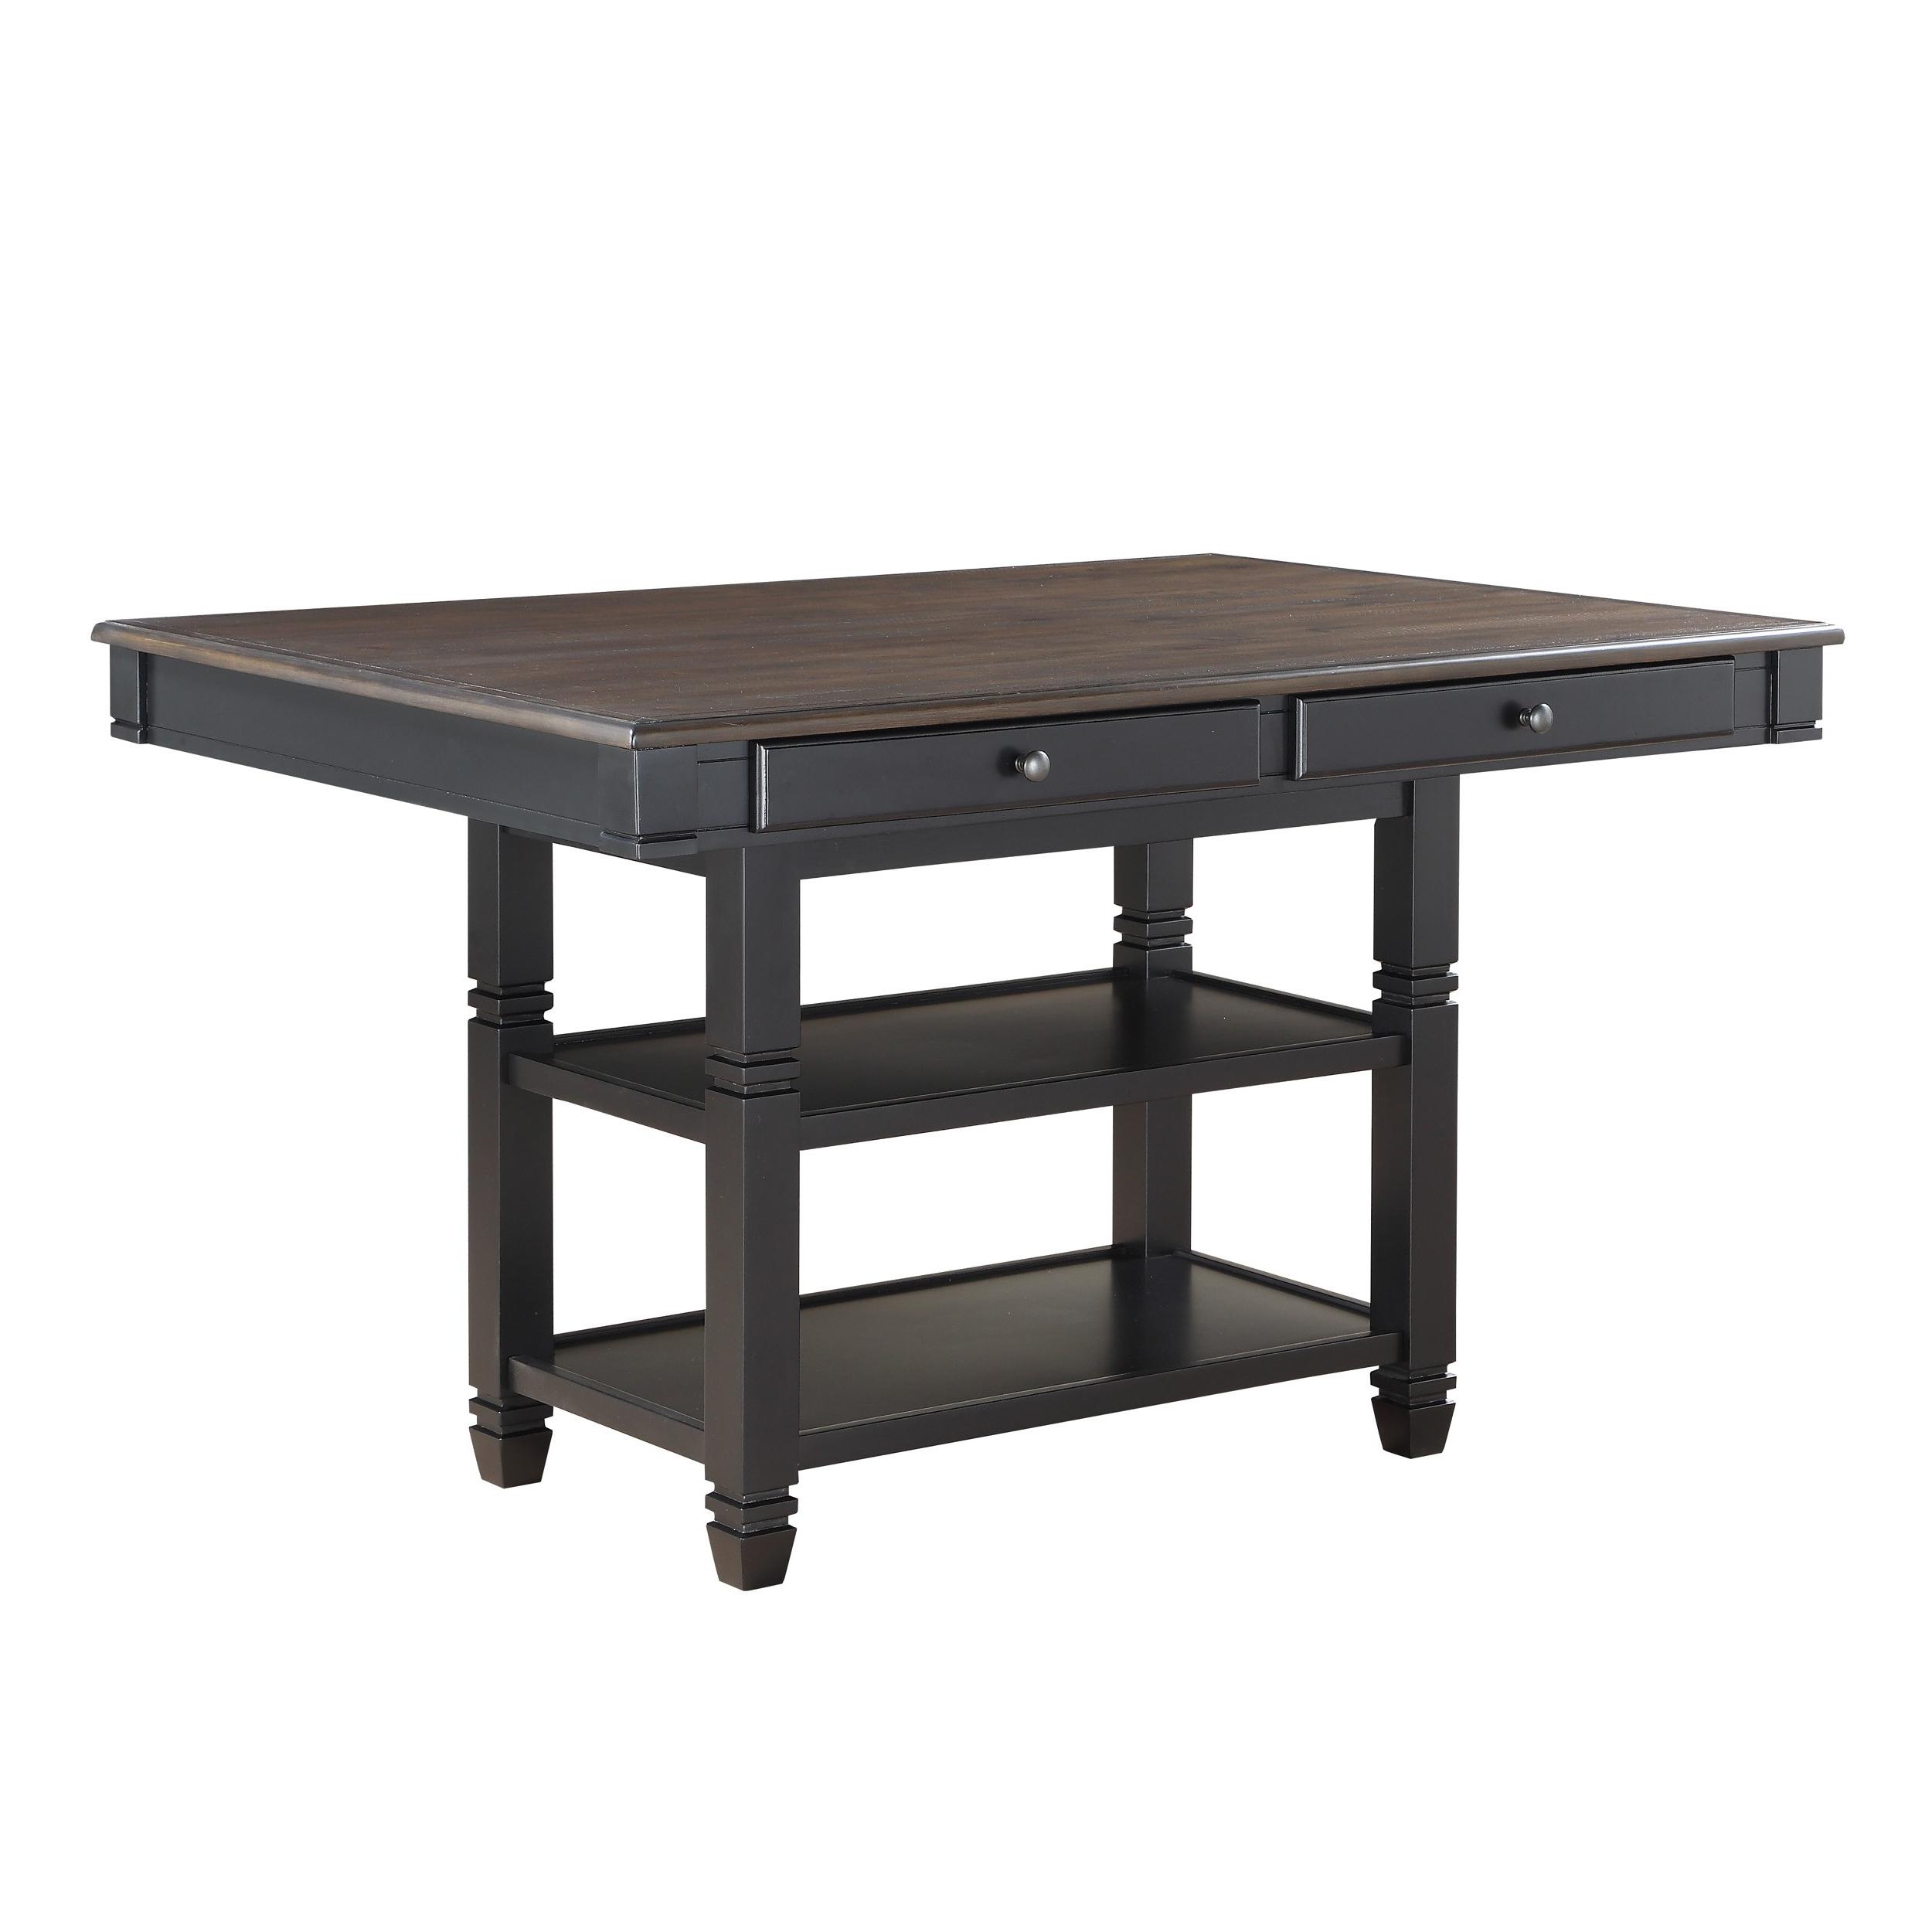 Transitional Counter Height Table 5705BK-36 Baywater 5705BK-36 in Black 